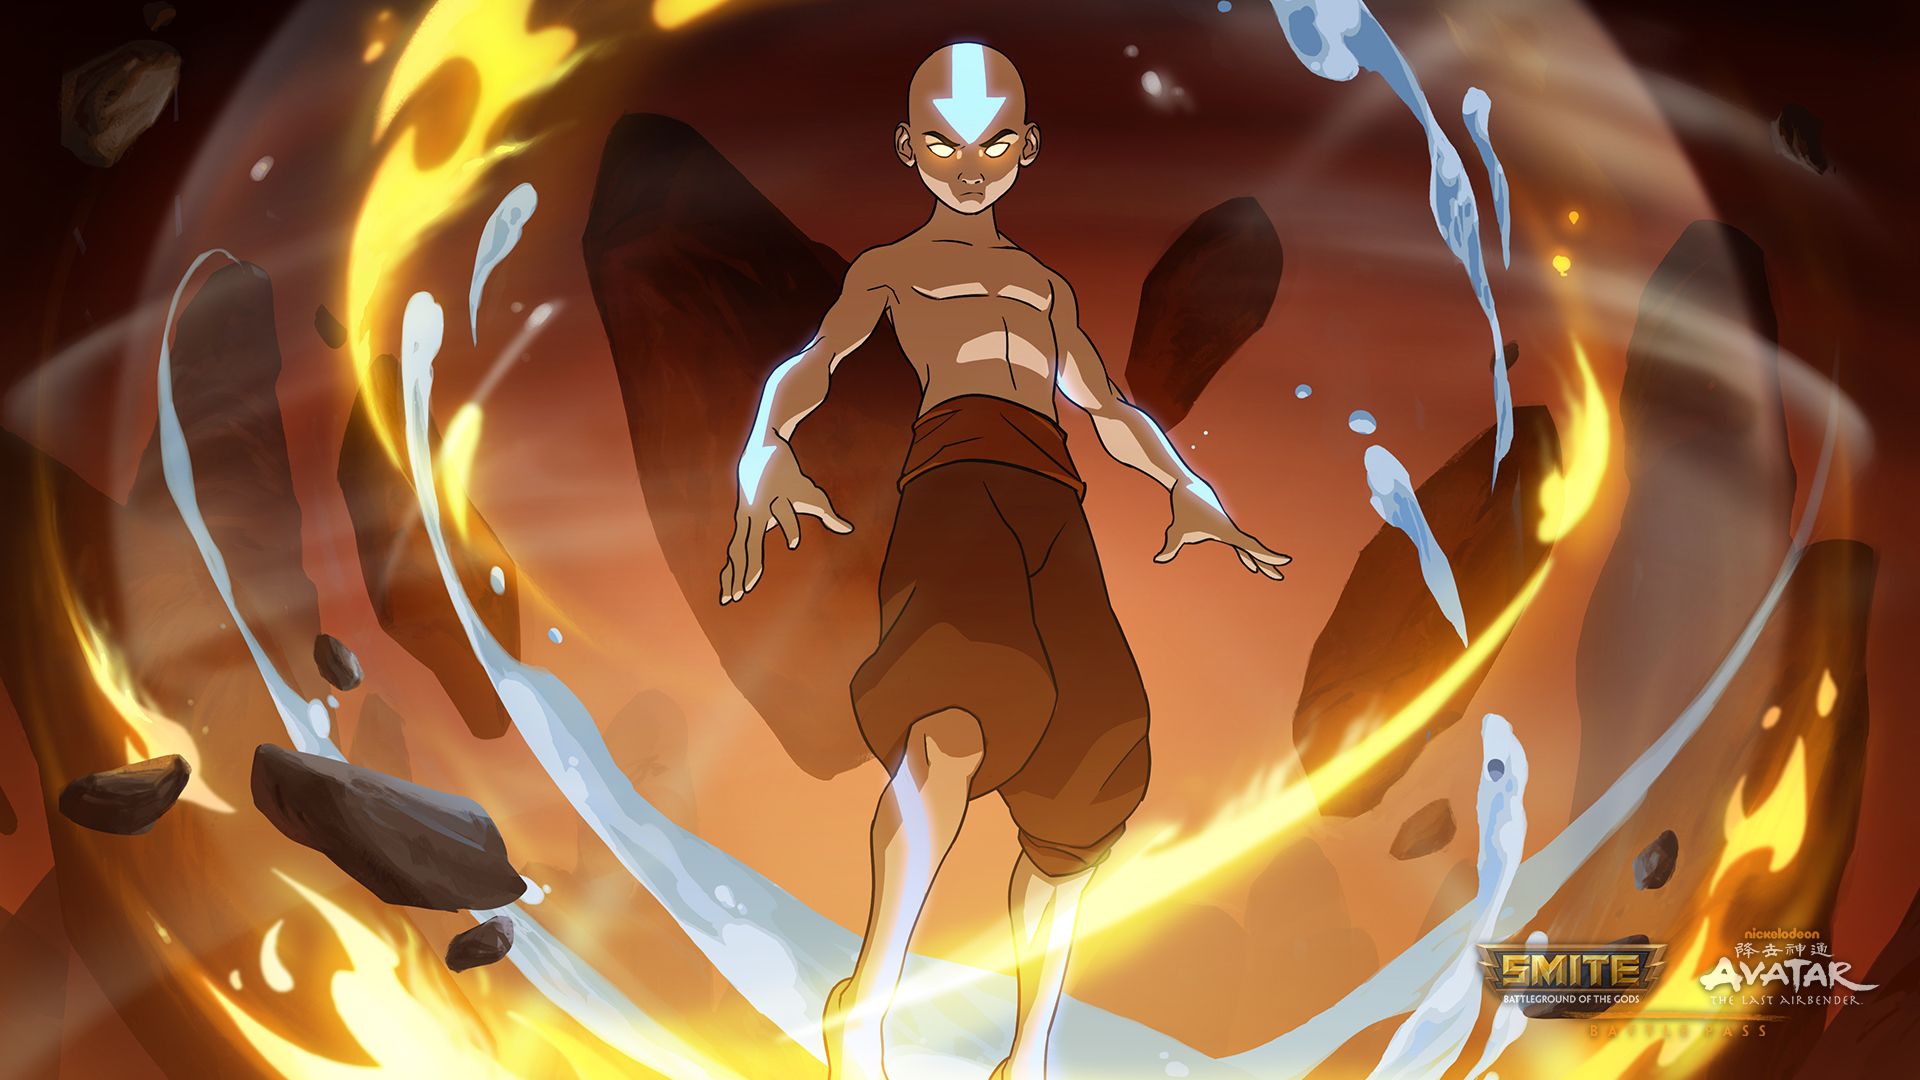 Get the full details of what's included with the Avatar: The Last Airbender Battle Pass